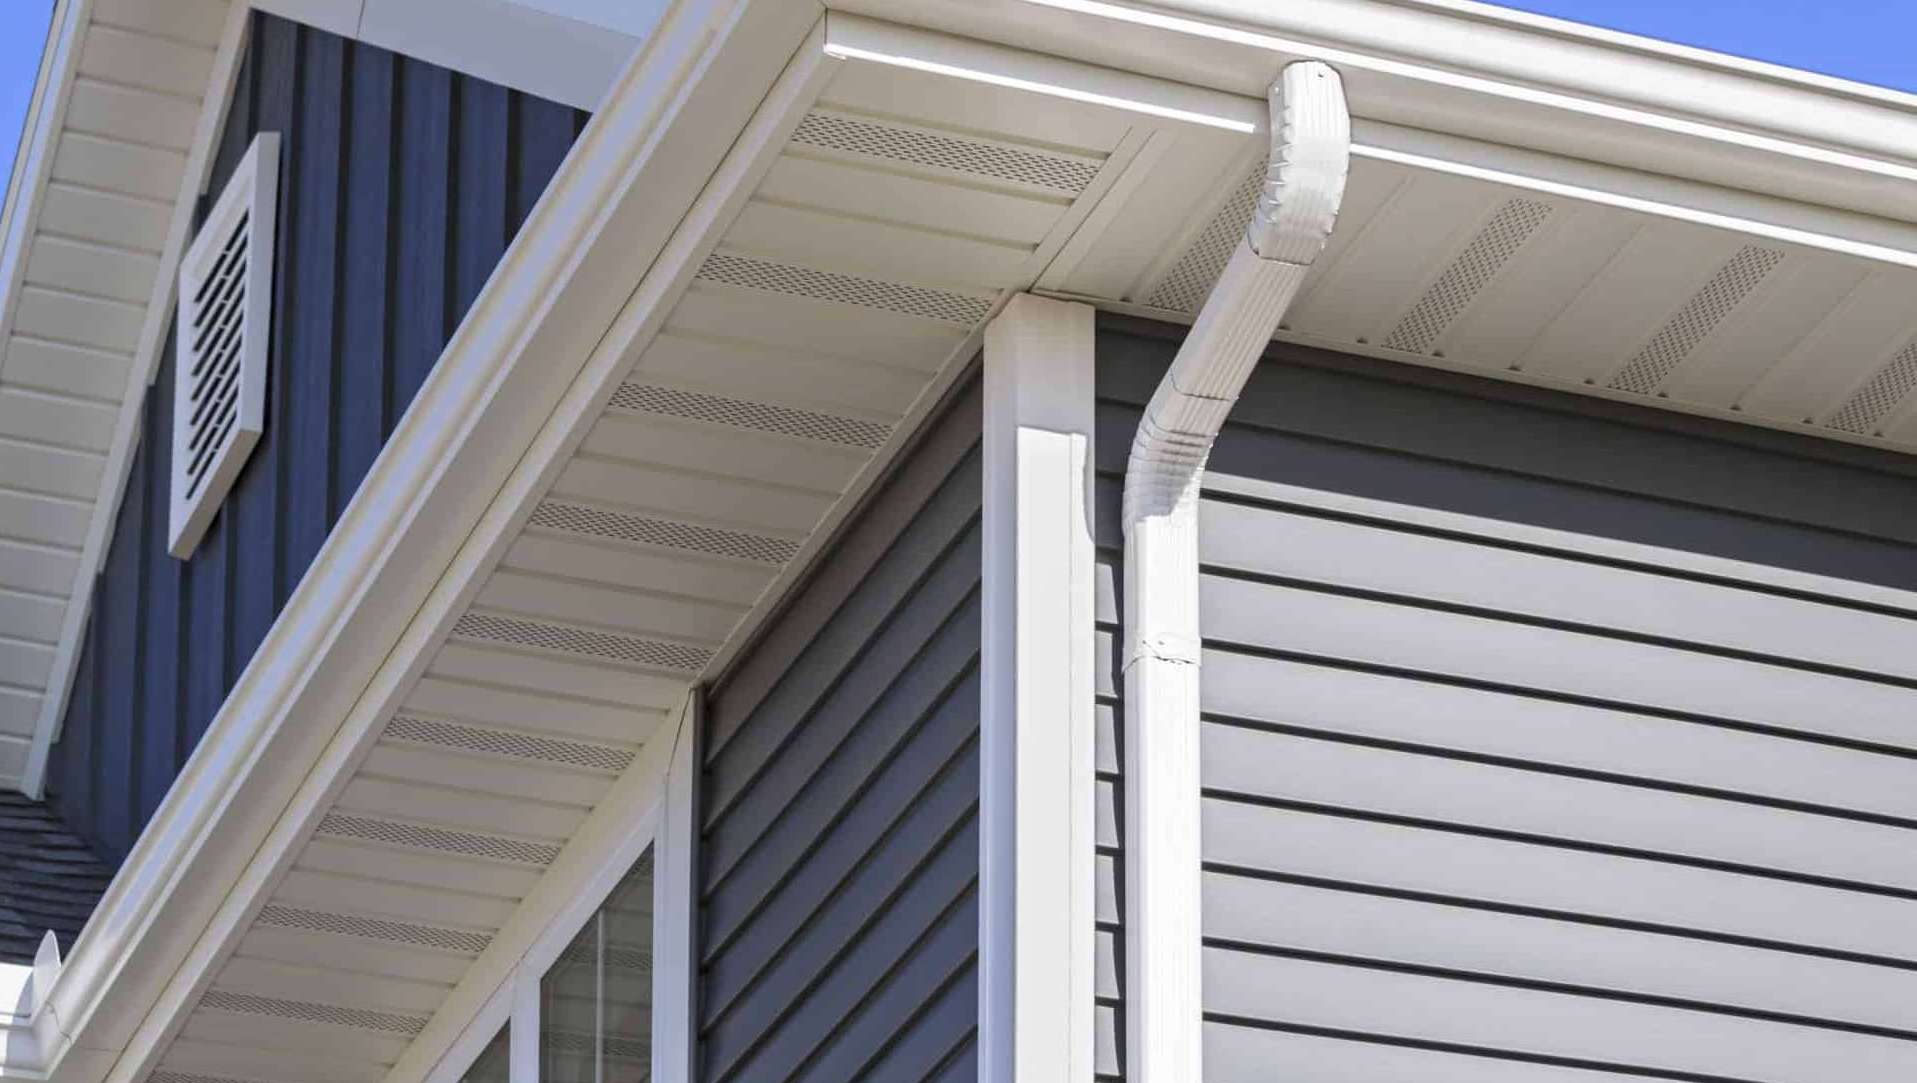 What Should You Know About Fascia and Soffit Repair?